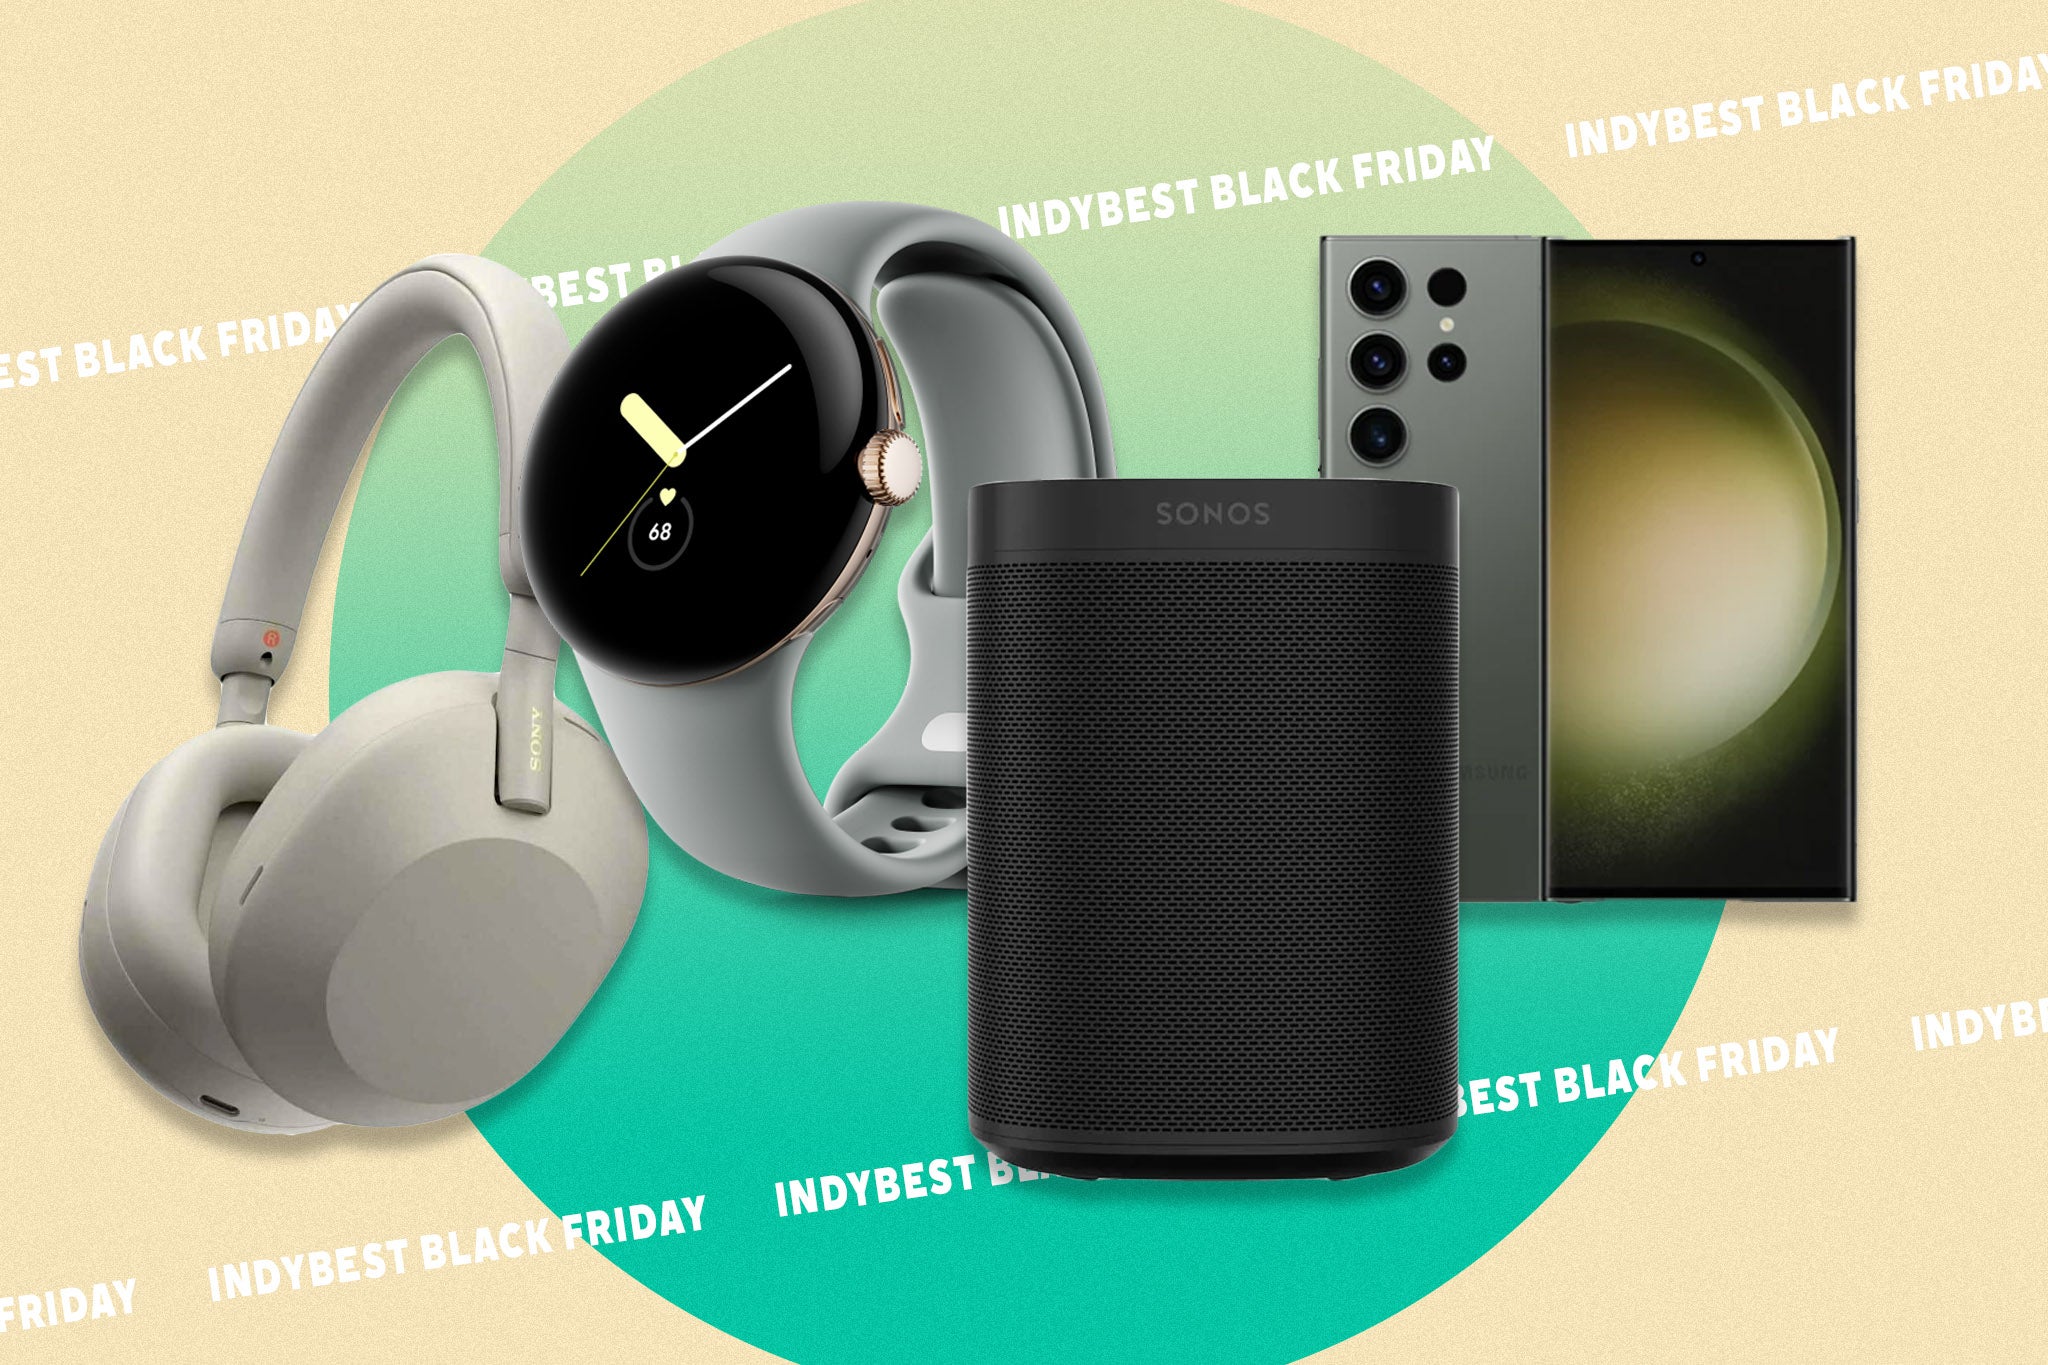 <p>Cheap wearables and deals on wireless headphones, Black Friday 2023 offers a whirlwind of savings </p>